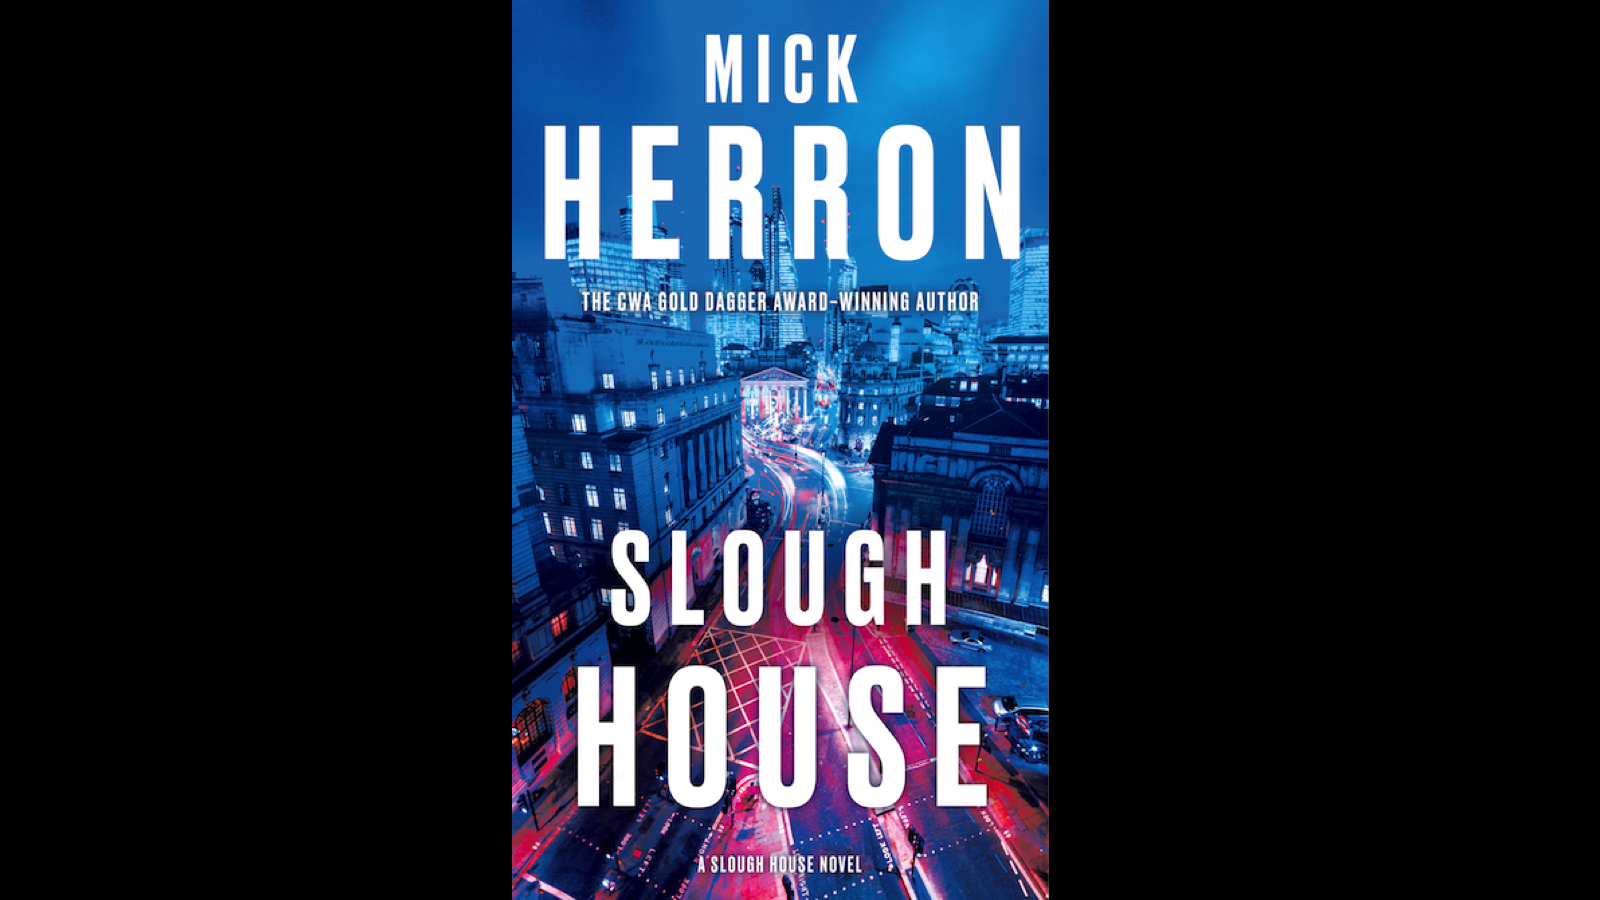 The cover of a slough house novel